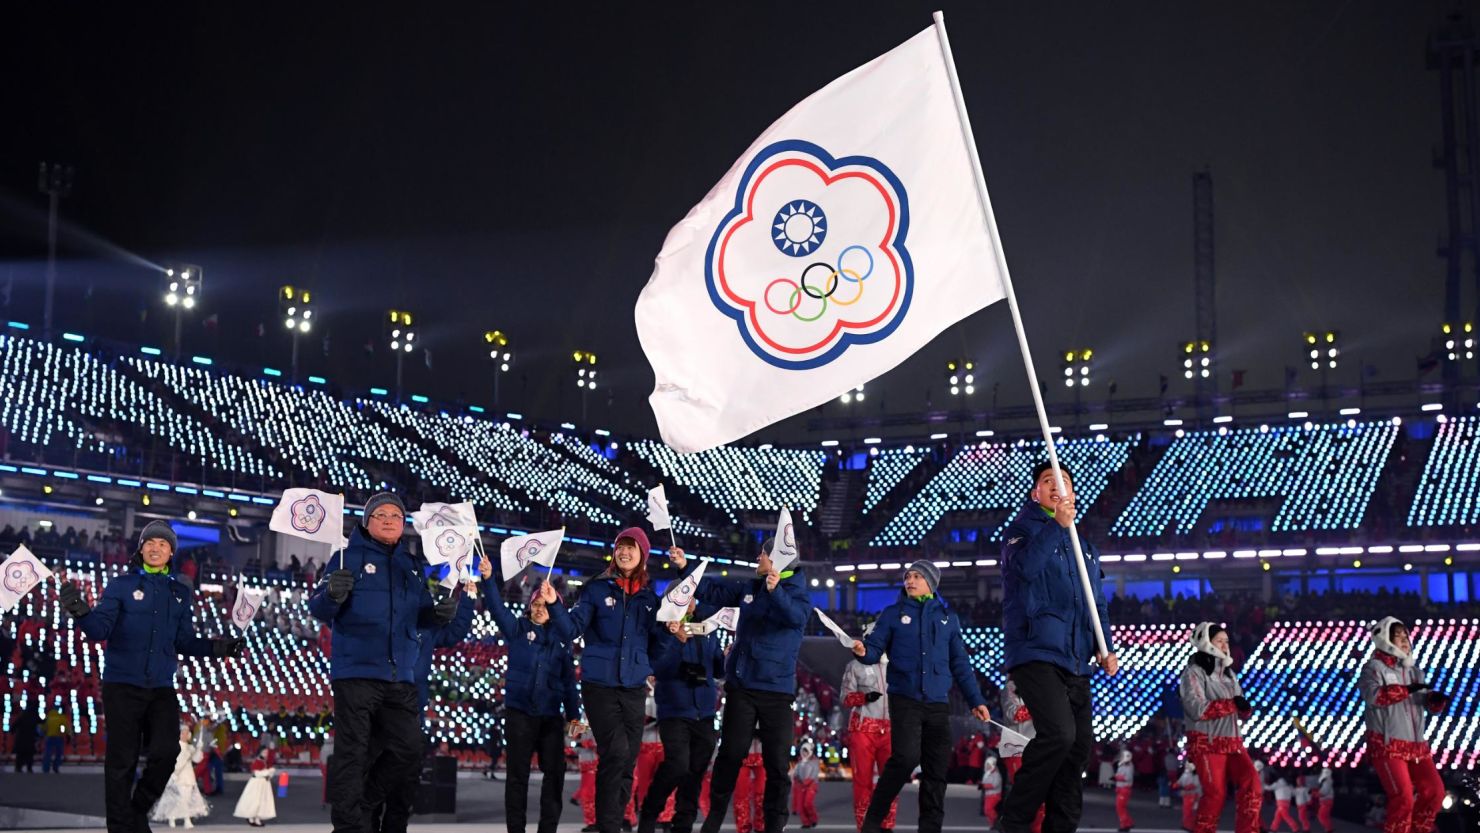 Flag bearer Te-An Lien of Chinese Taipei and teammates enter the stadium during the Opening Ceremony of the PyeongChang 2018 Winter Olympic Games at PyeongChang Olympic Stadium in South Korea. 